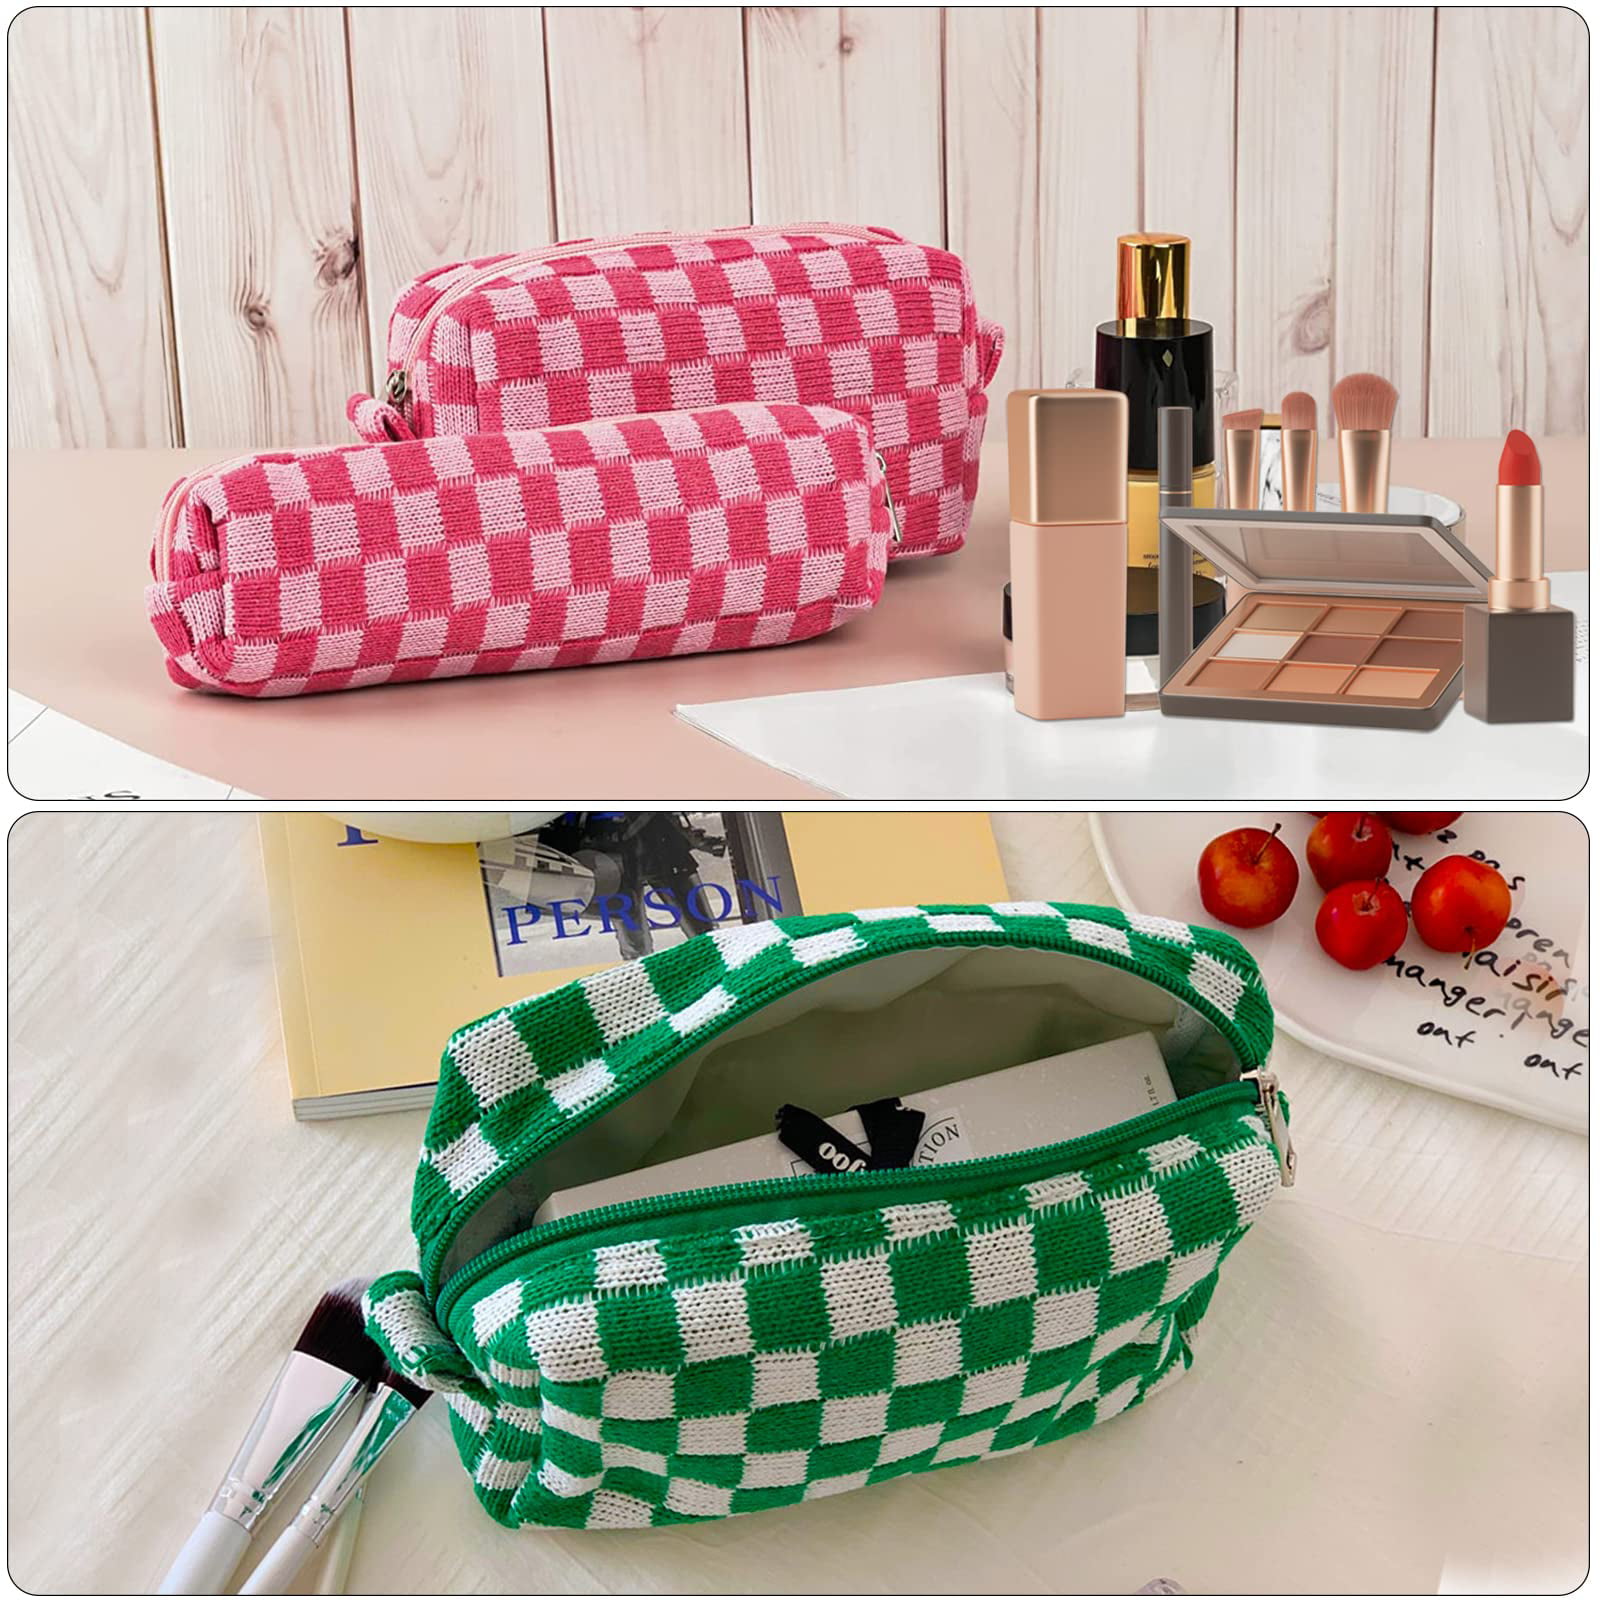 2pcs/set Plaid Makeup Bag With Color Block Knitted Wool Yarn Detail And  Alphabet Print, Portable, Large Capacity, Ideal For Daily Use In Autumn And  Winter Black Friday